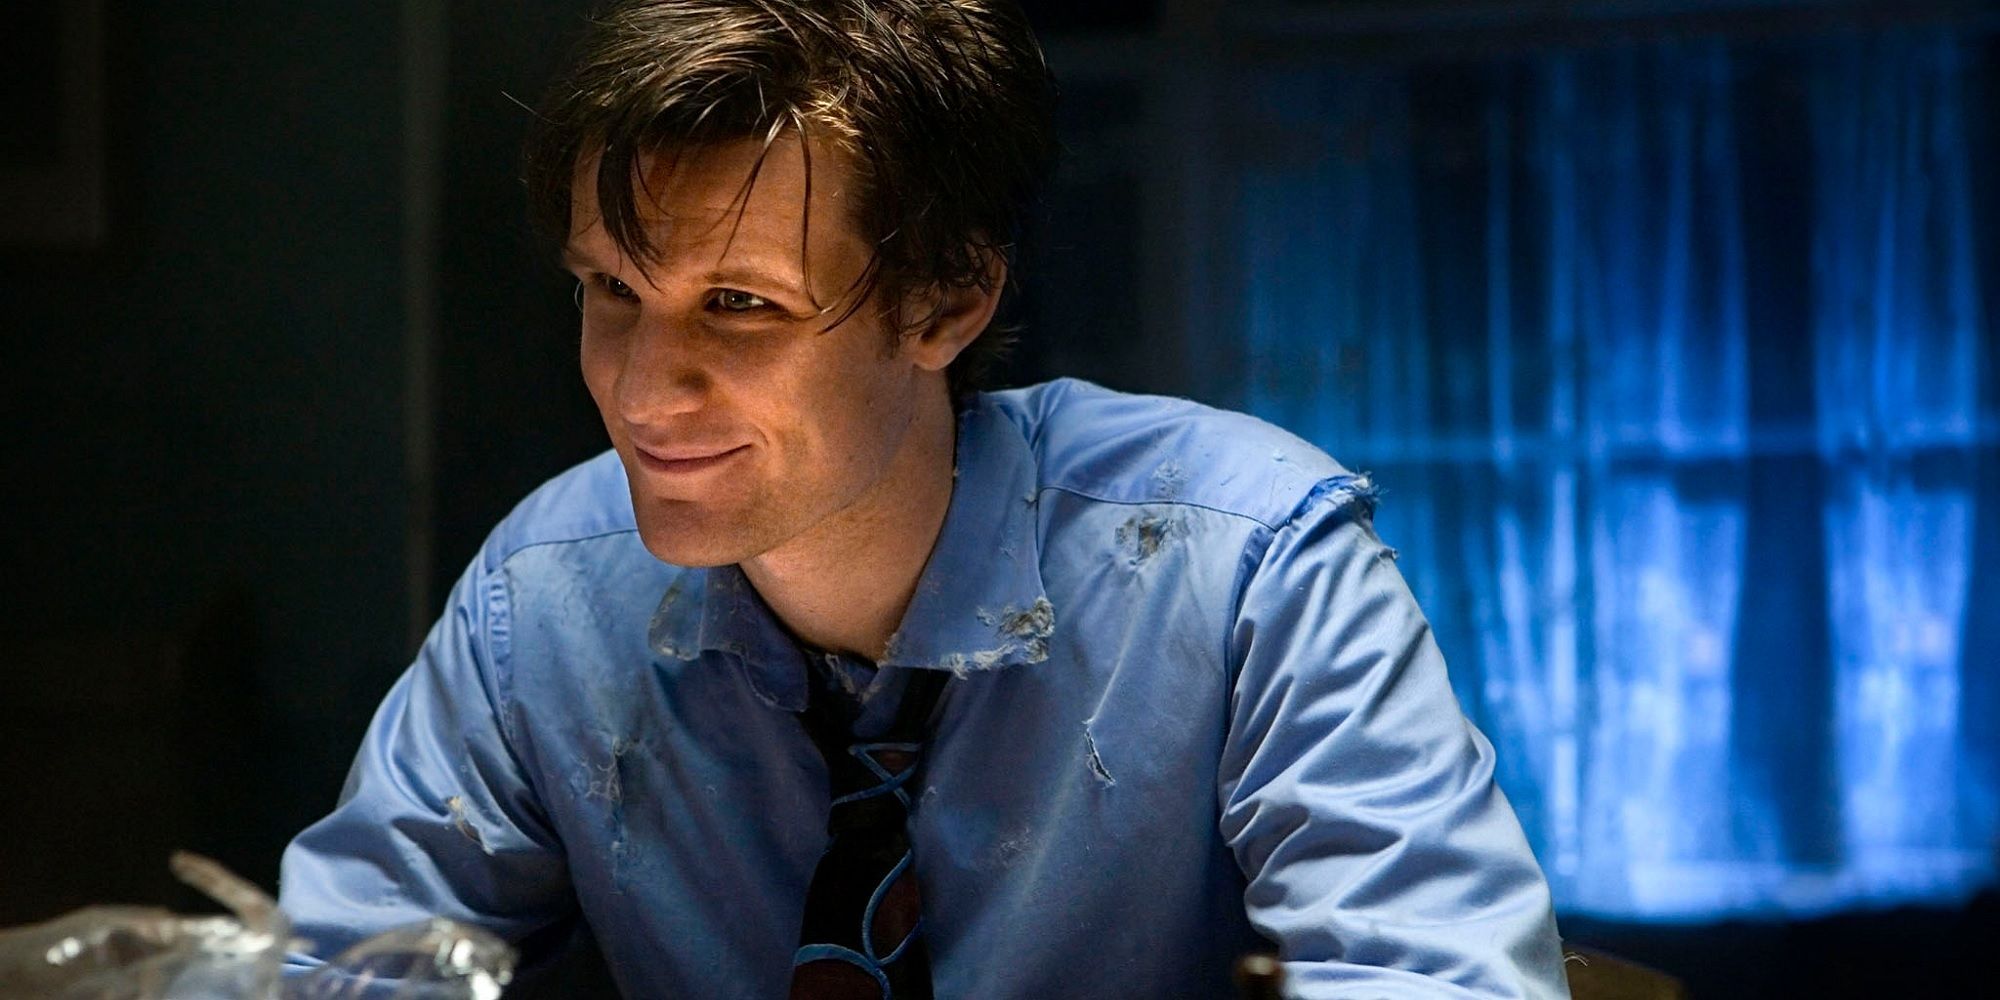 Doctor Who image with Matt Smith's Eleventh Doctor smiling in a dark room